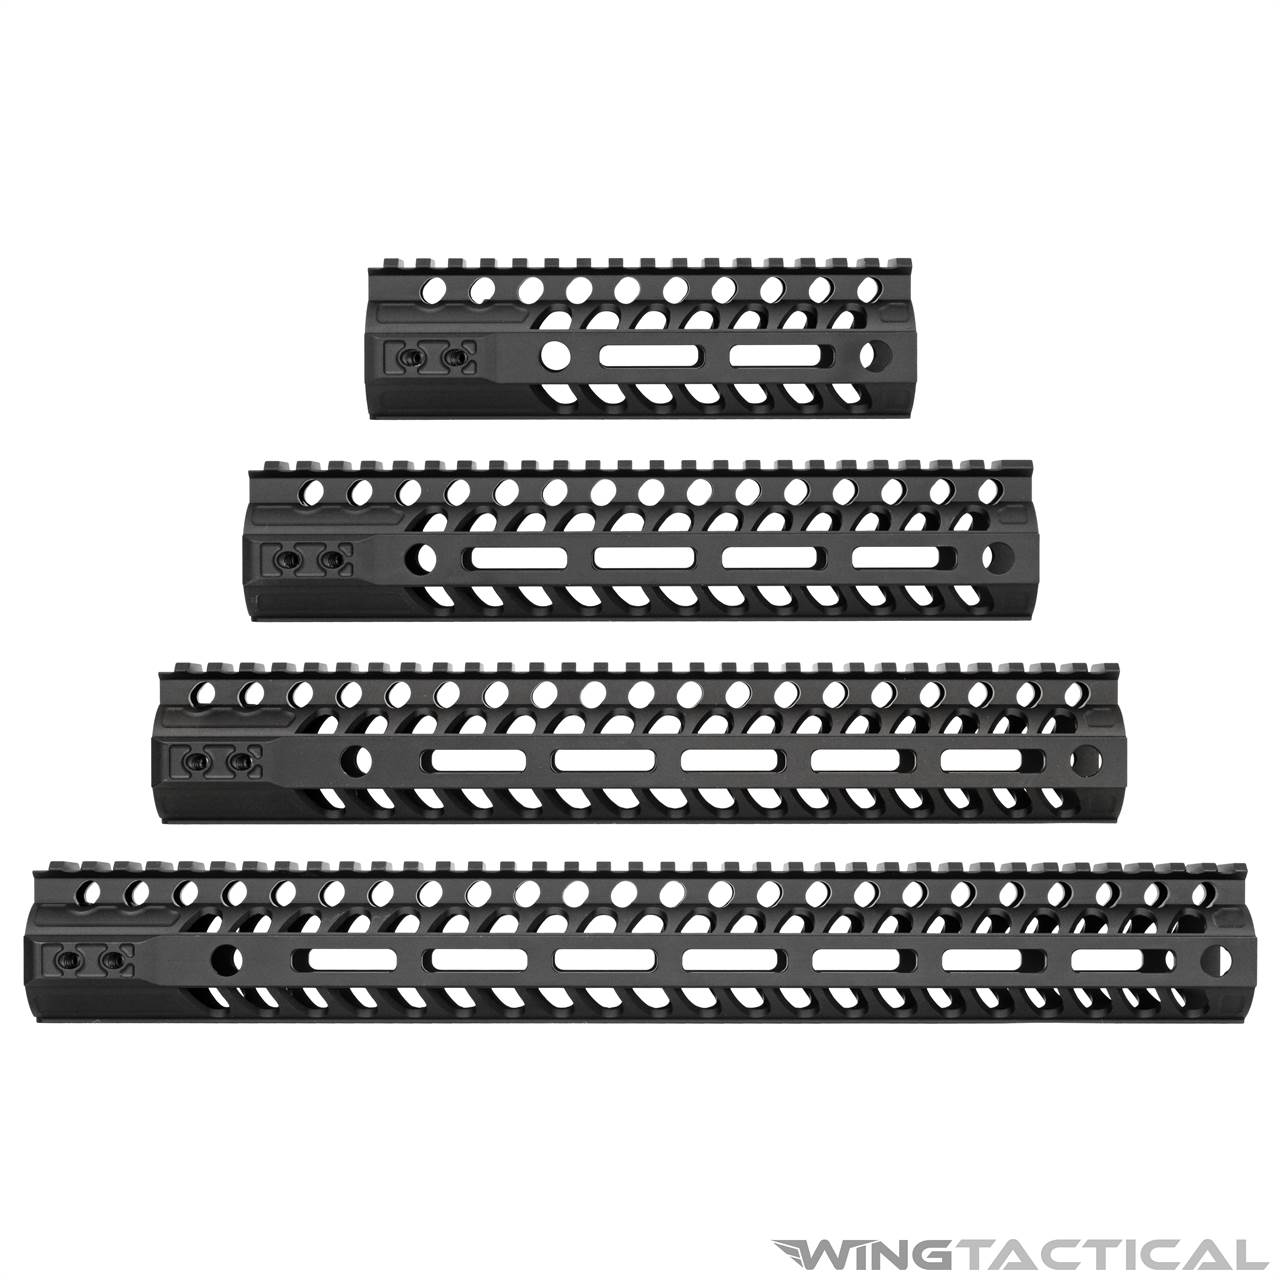 2A Armament Aethon M-LOK Rail Systems | Wing Tactical